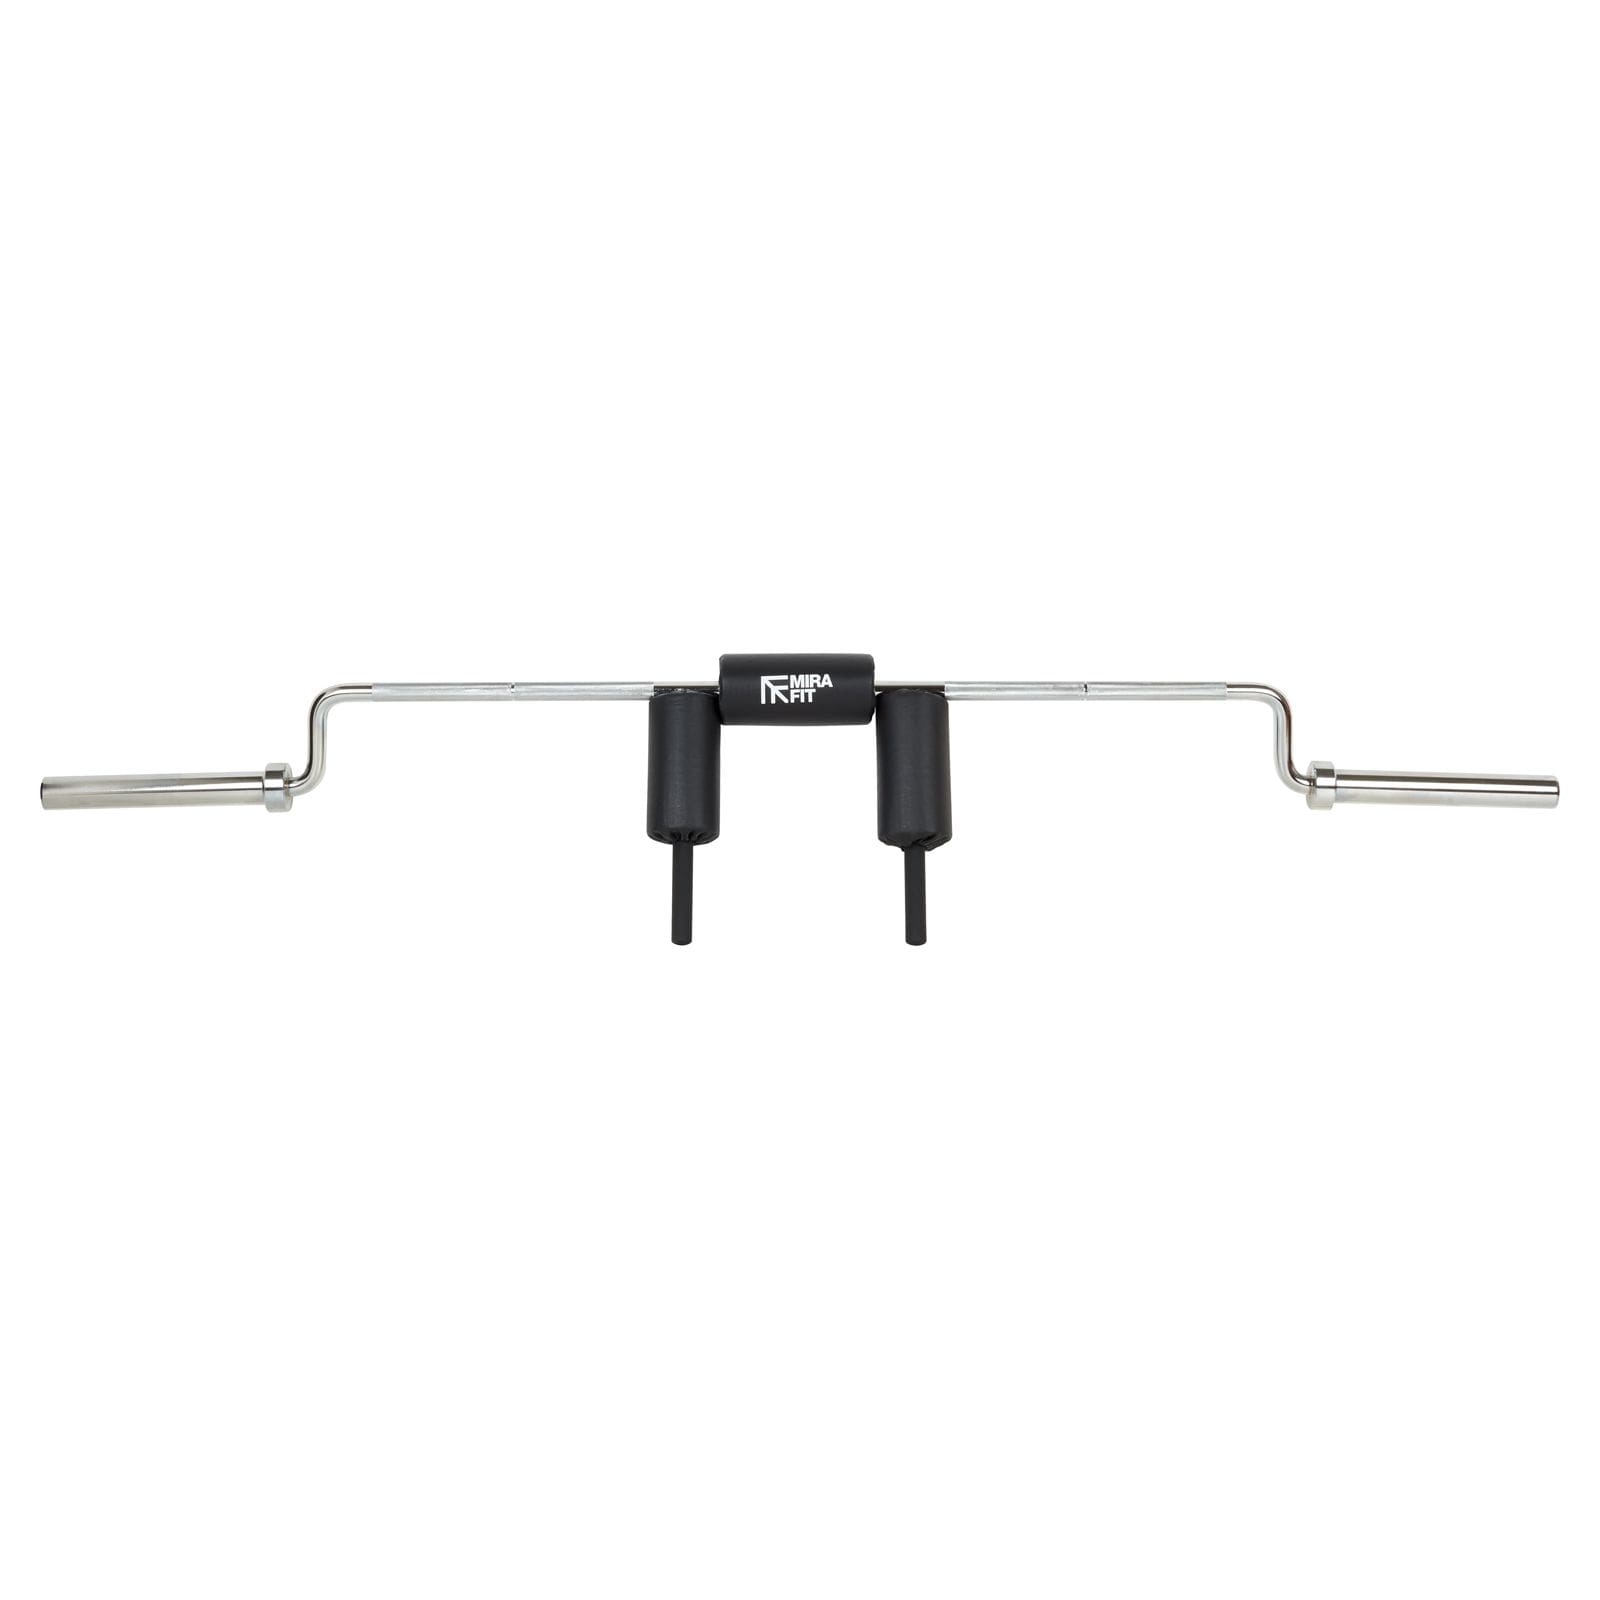 Mirafit Safety Squat Bar Review Side View